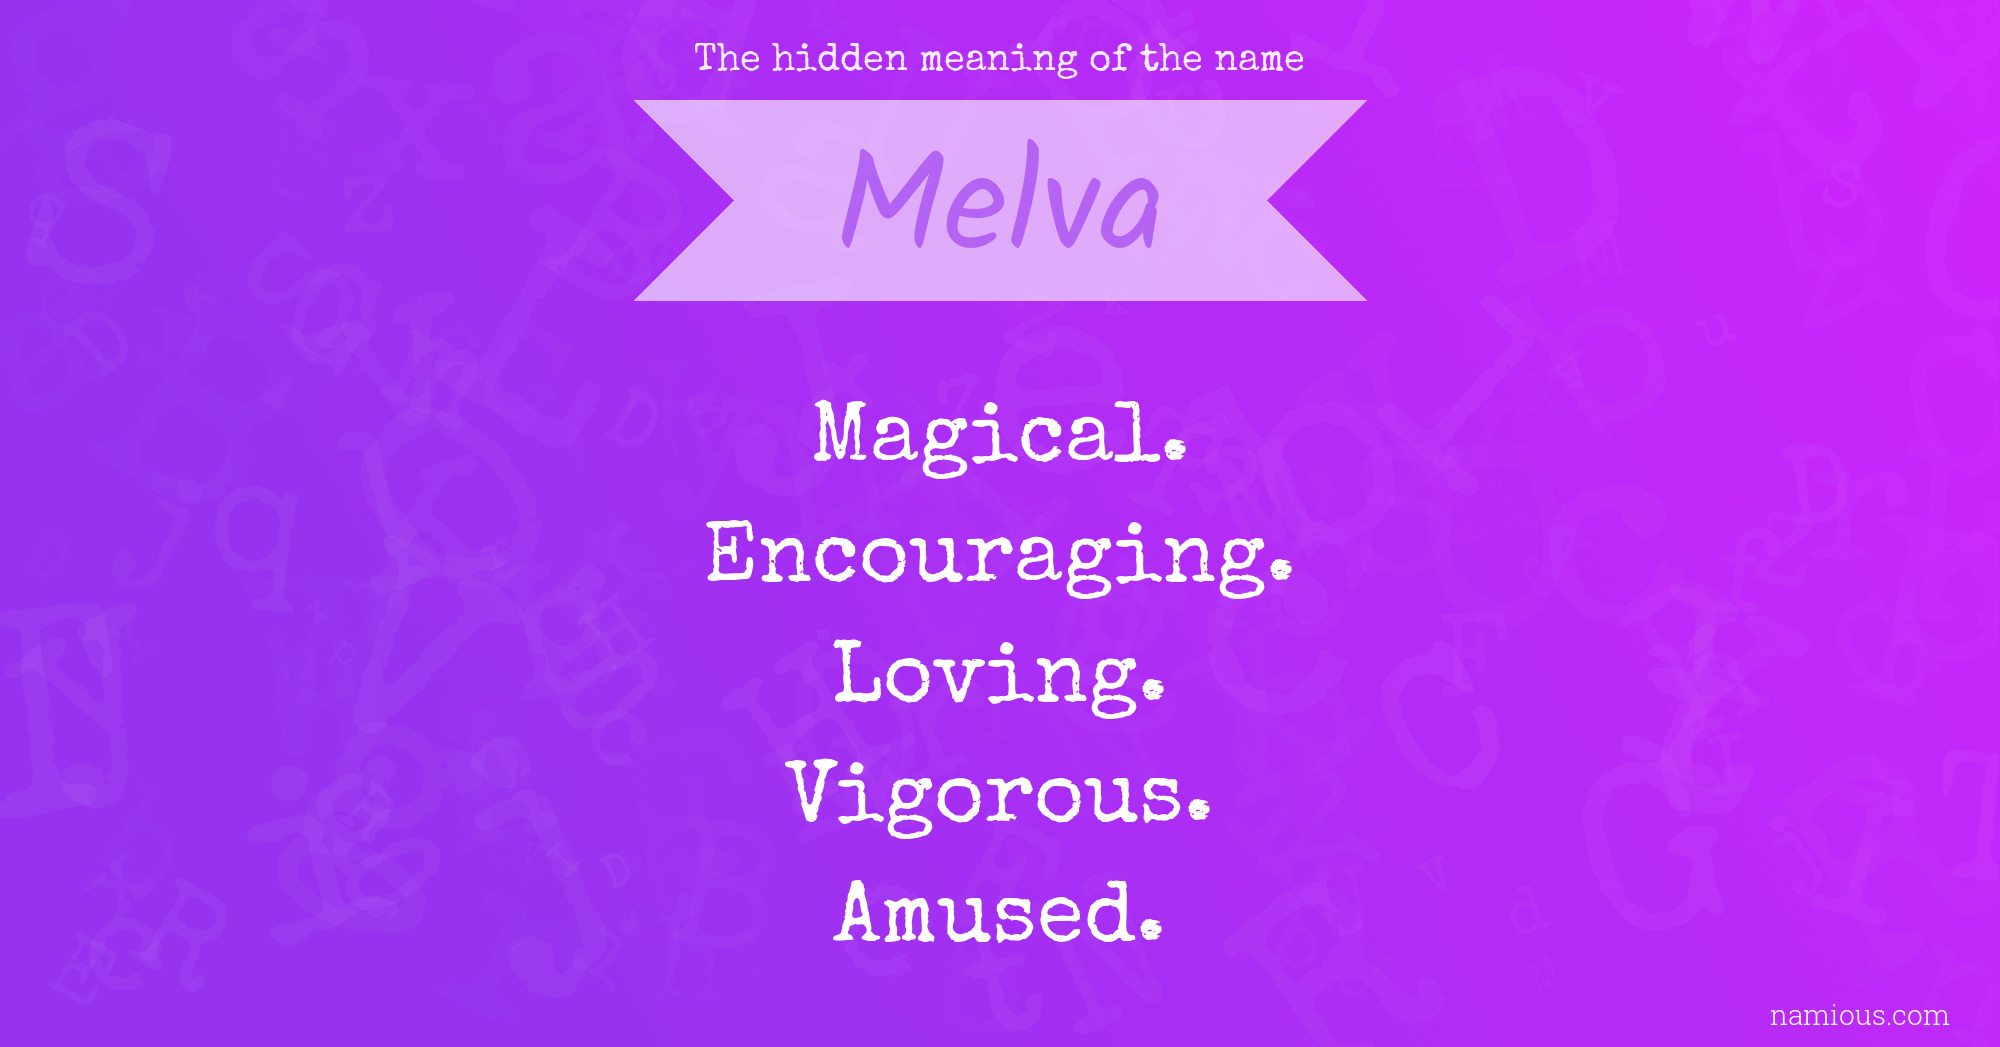 The hidden meaning of the name Melva